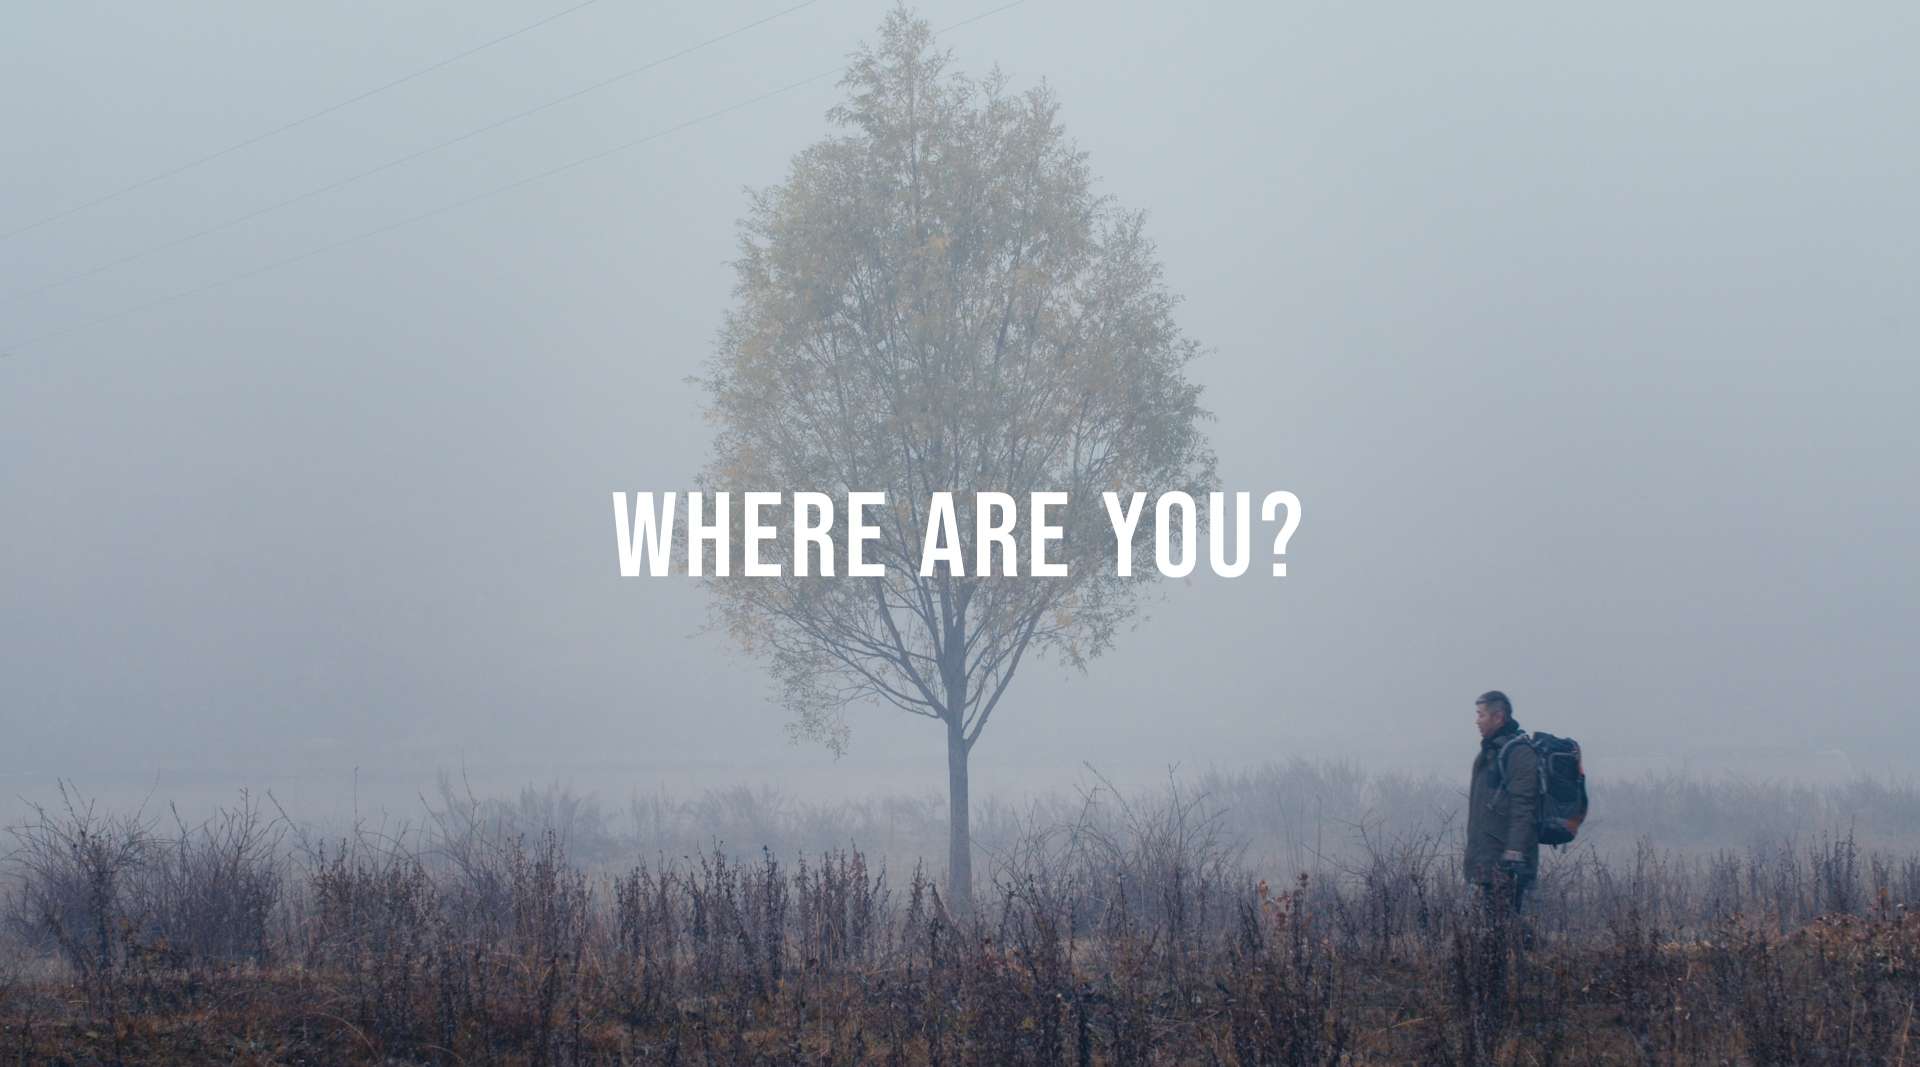 WHERE ARE YOU ？